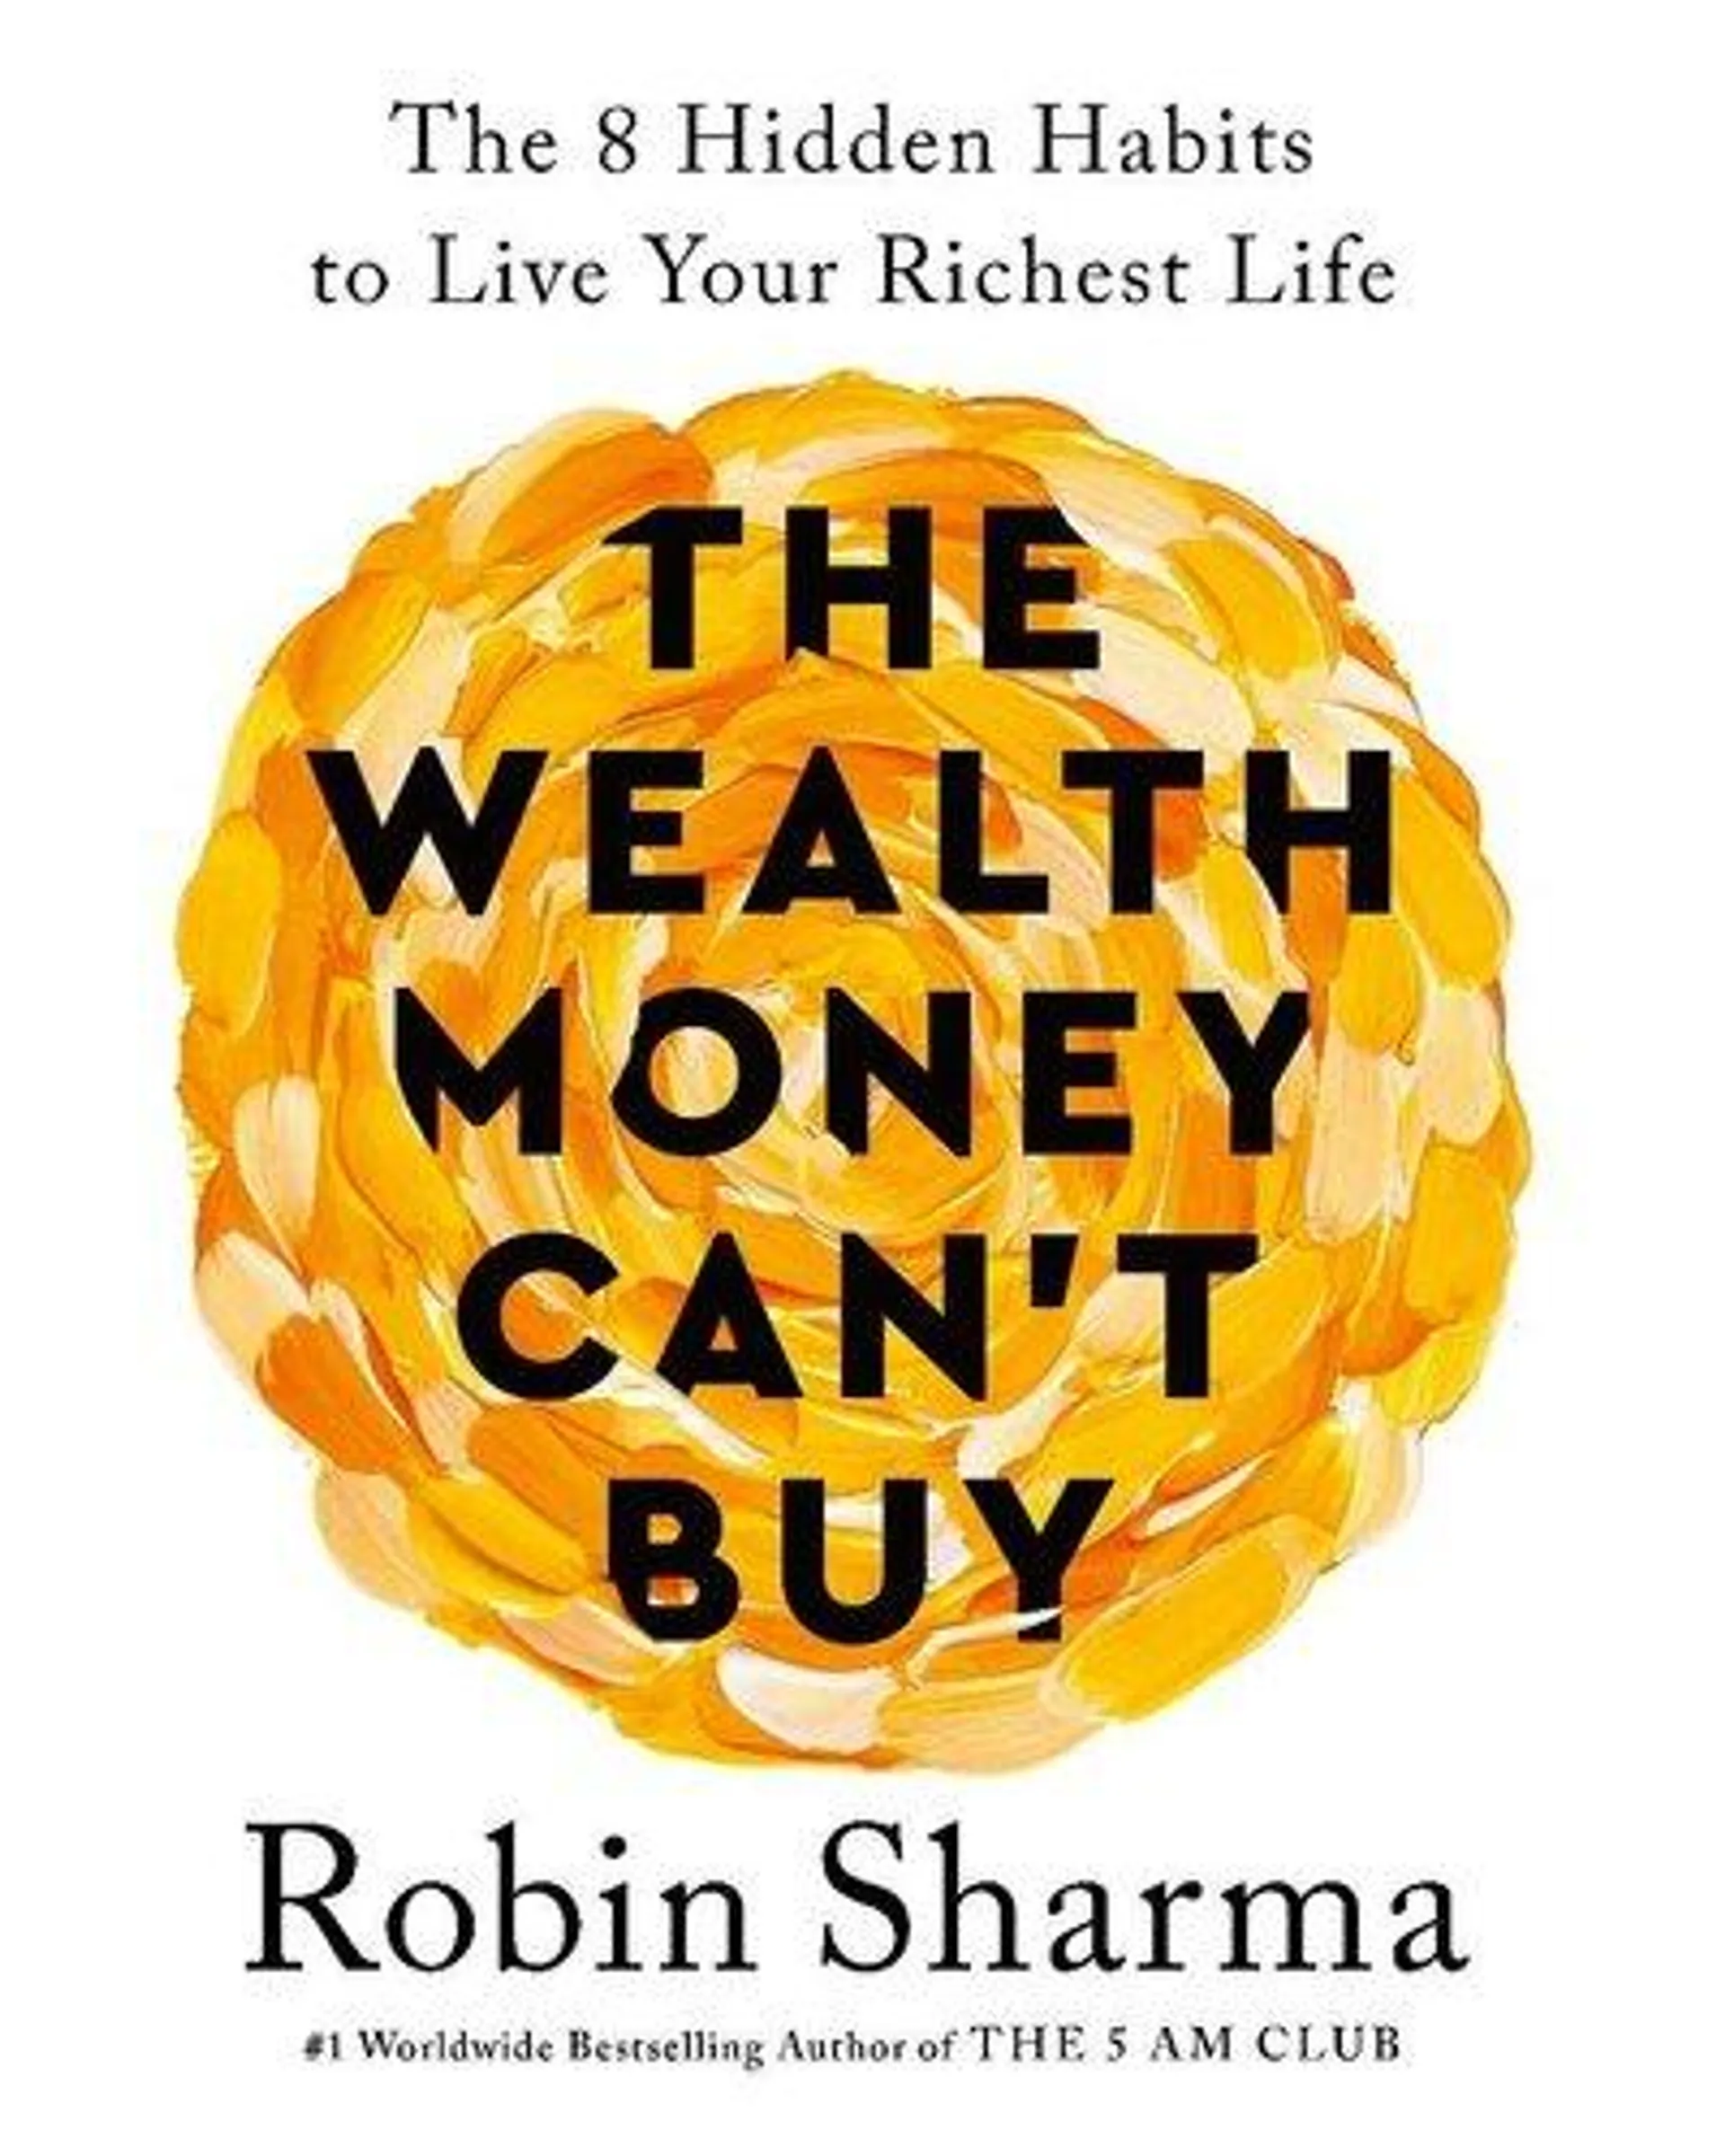 The Wealth Money Can't Buy - The 8 Hidden Habits To Live Your Richest Life (Paperback)